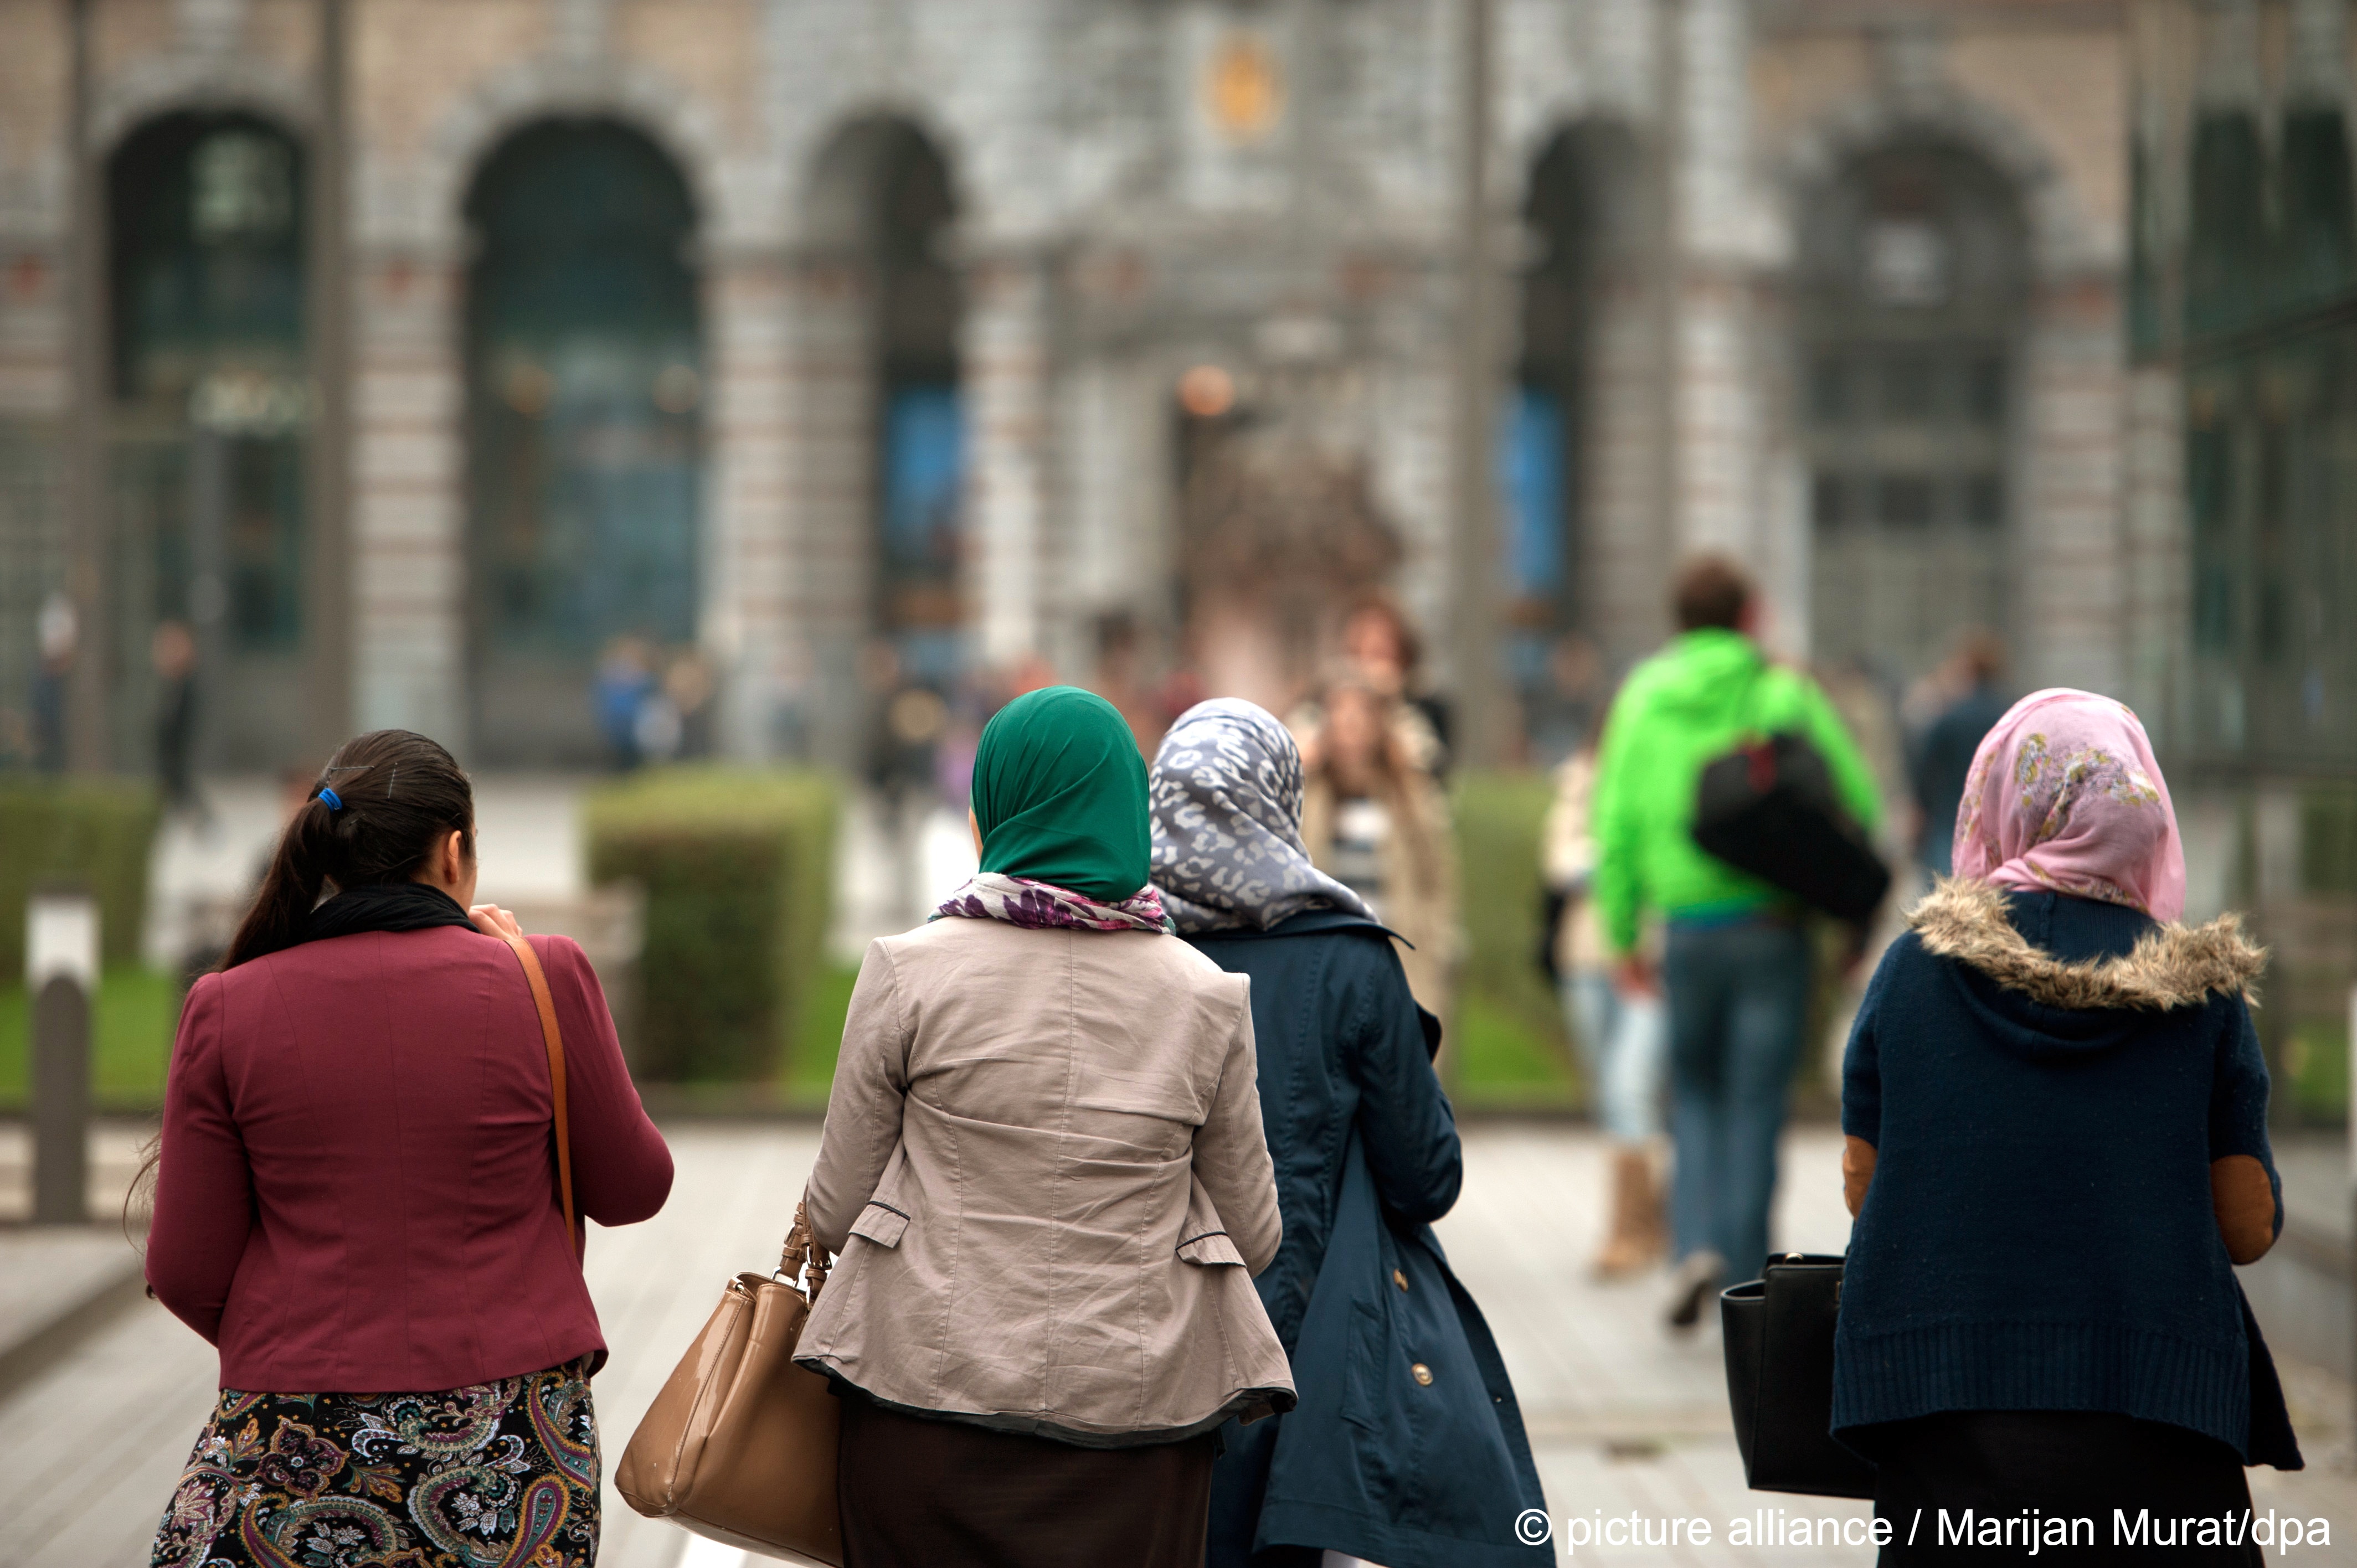 Four young women seen from behind, three of whom are wearing headscarves, walk through Antwerp, Belgium, 2013